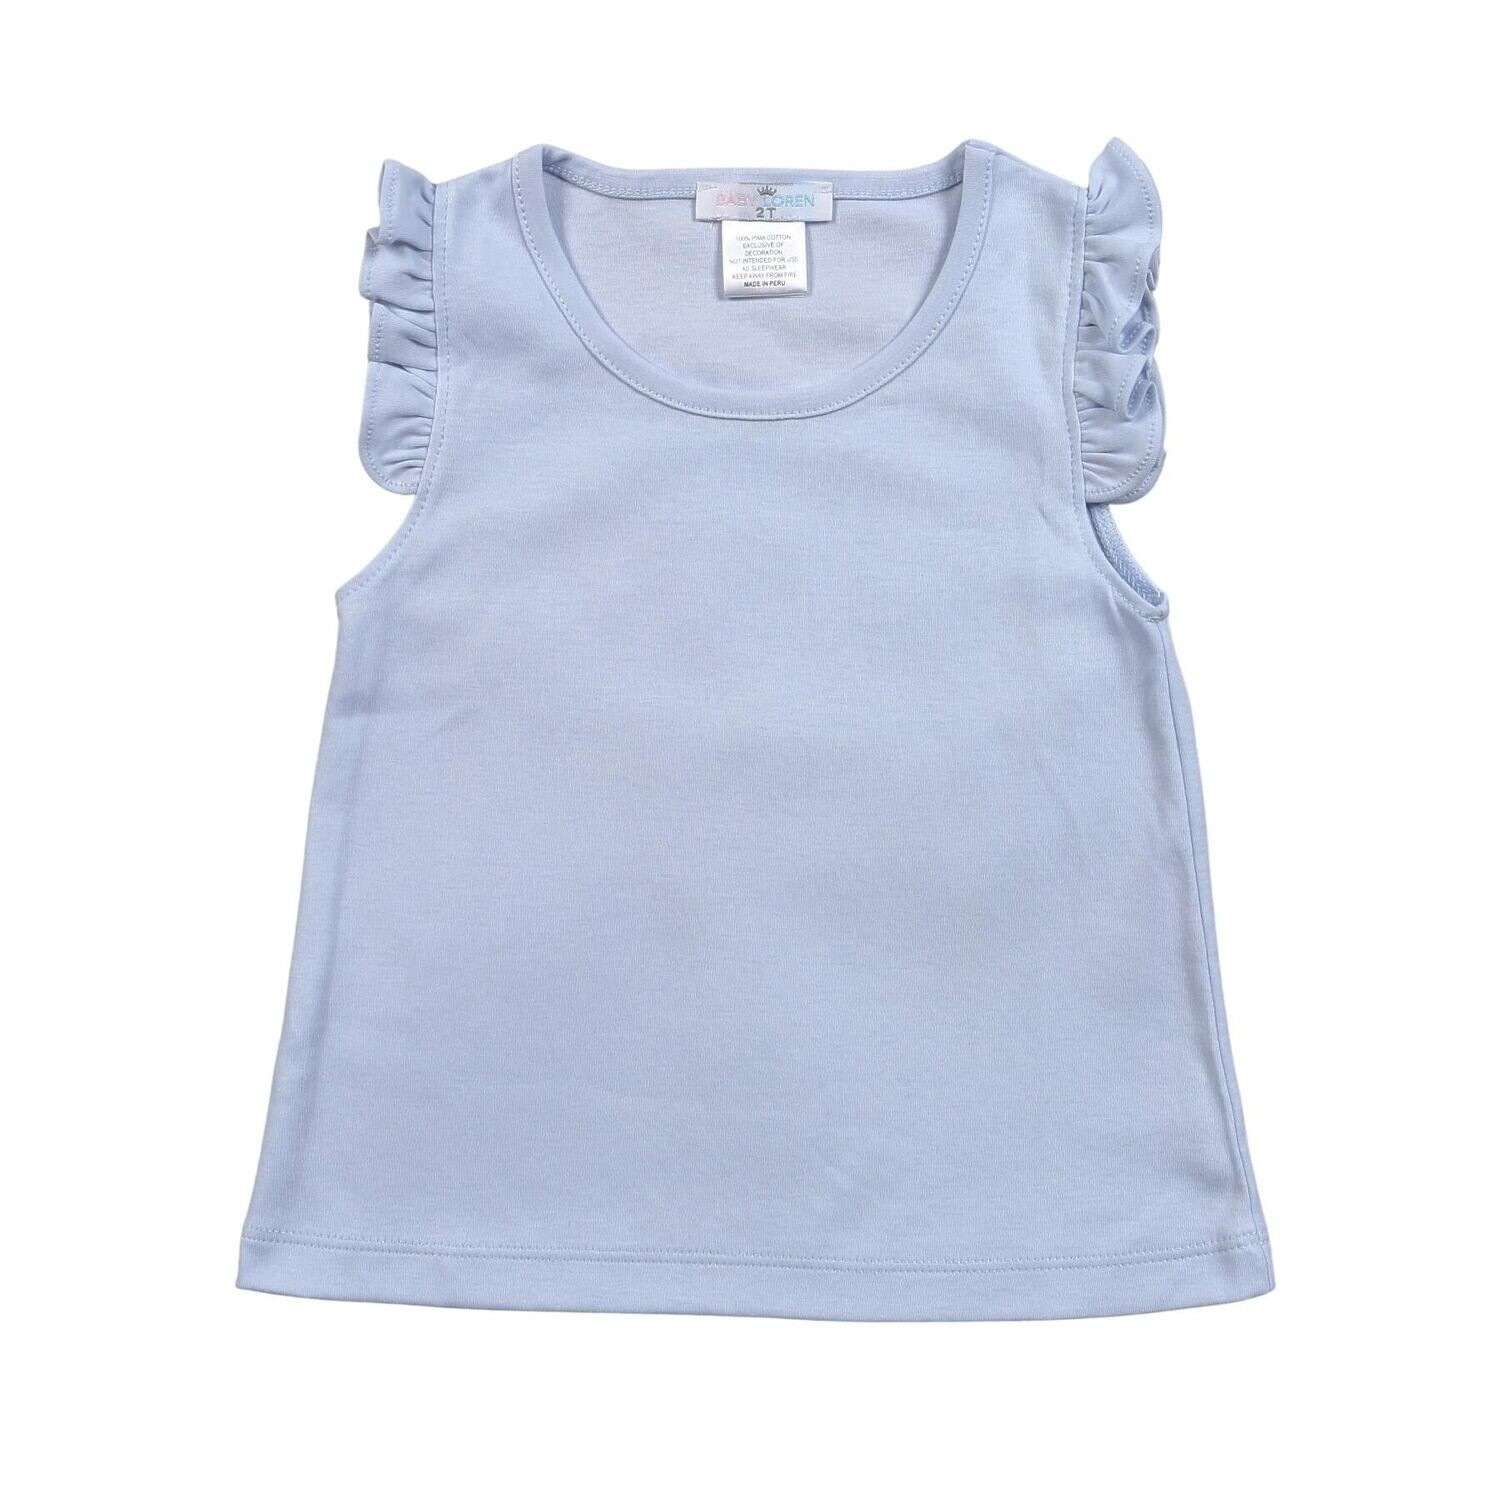 Blue Butterfly Sleeveless Top, Size: 2T